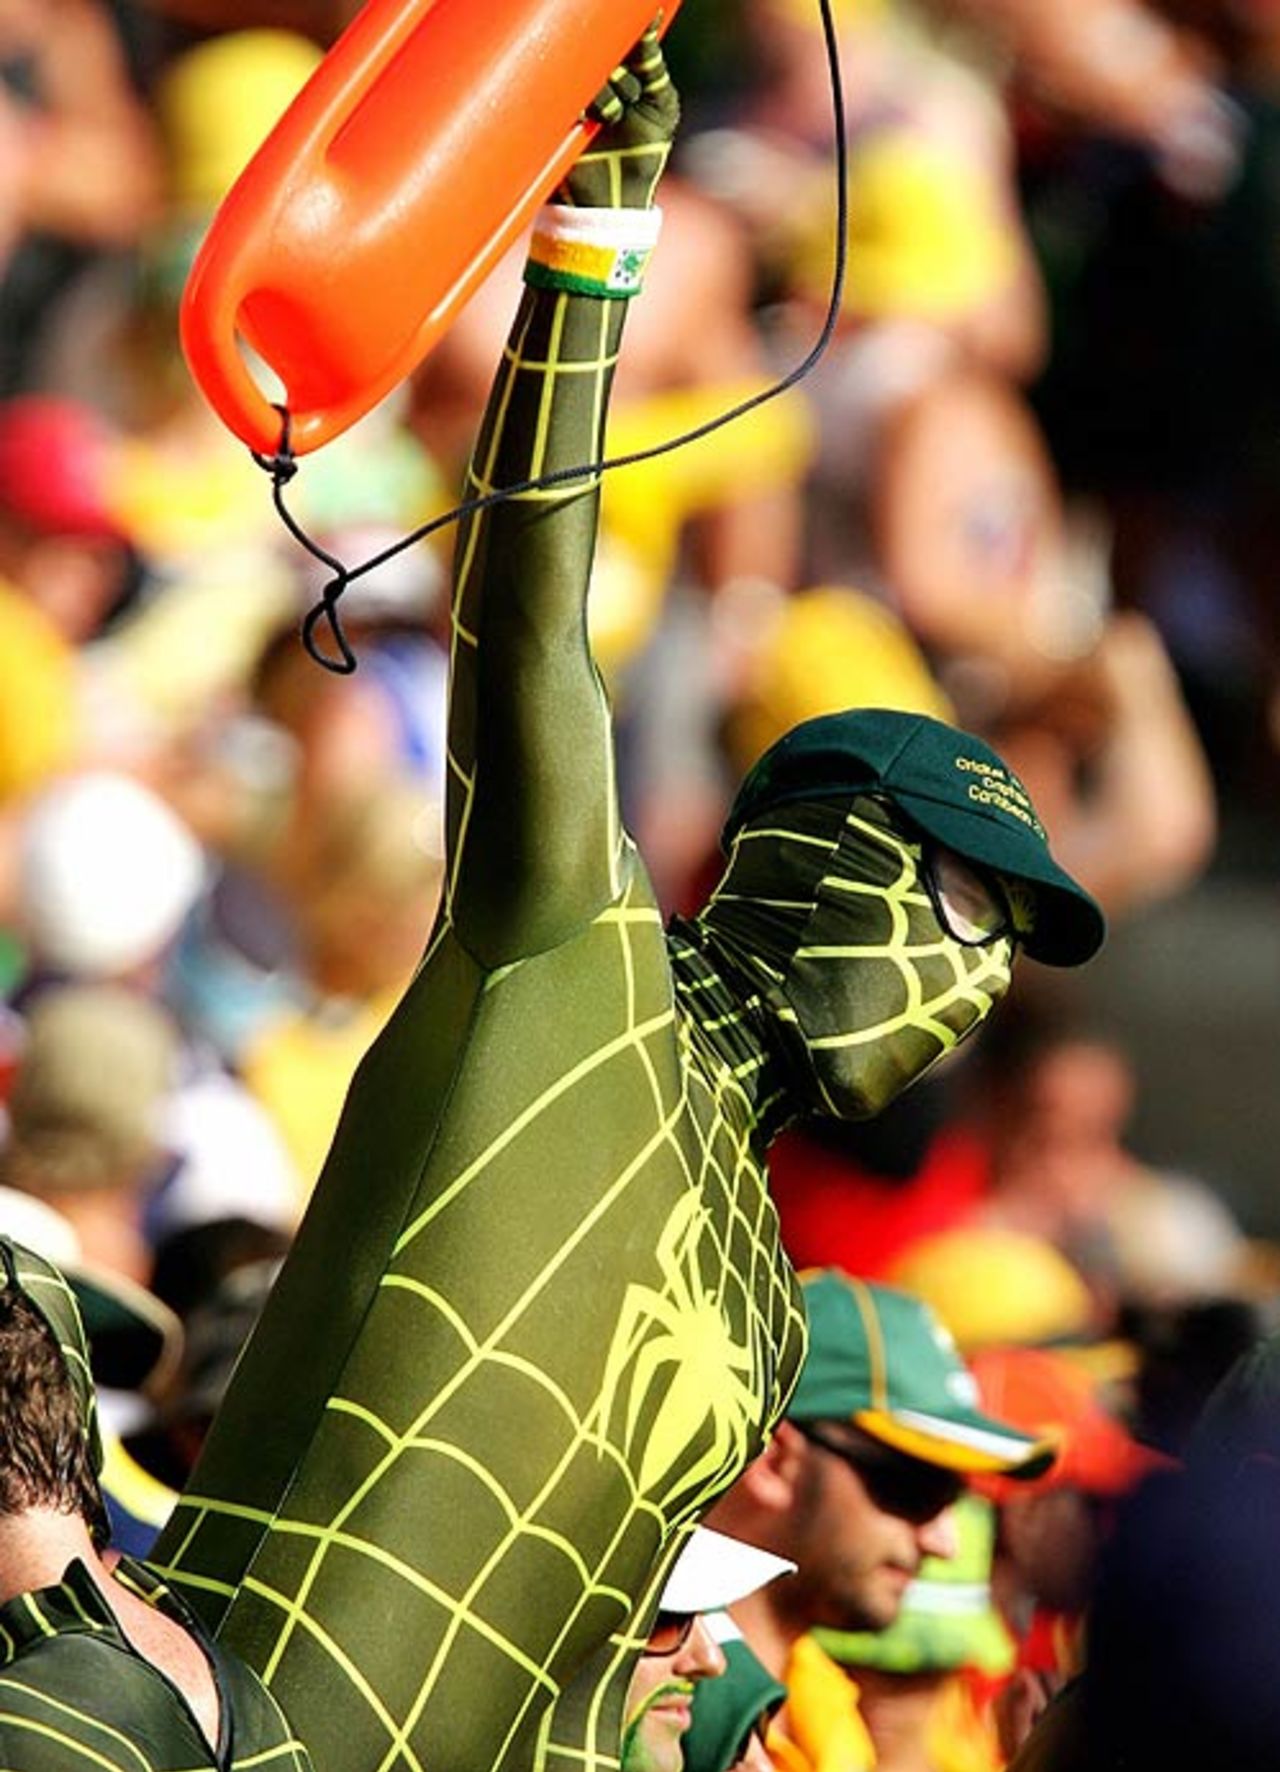 A fan dressed in a green and gold Spiderman outfit cheers for Australia, Australia v Sri Lanka, Super Eights, Grenada, April 16, 2007